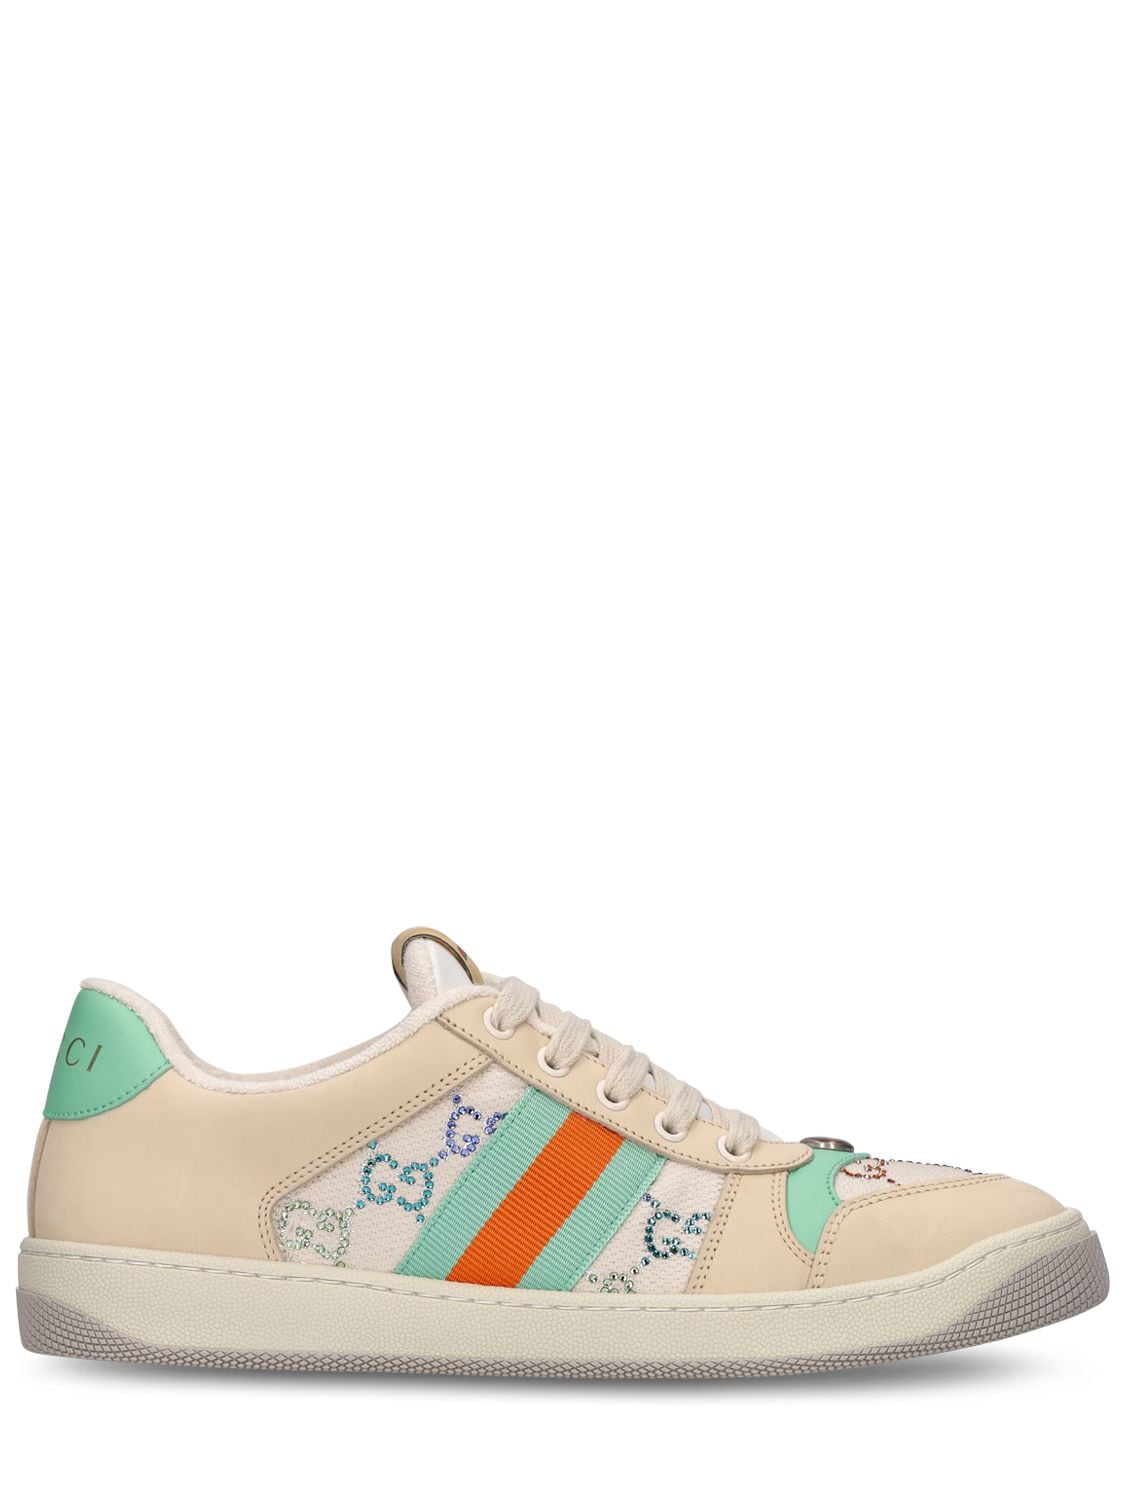 GUCCI 30mm Screener Gg Canvas Sneakers